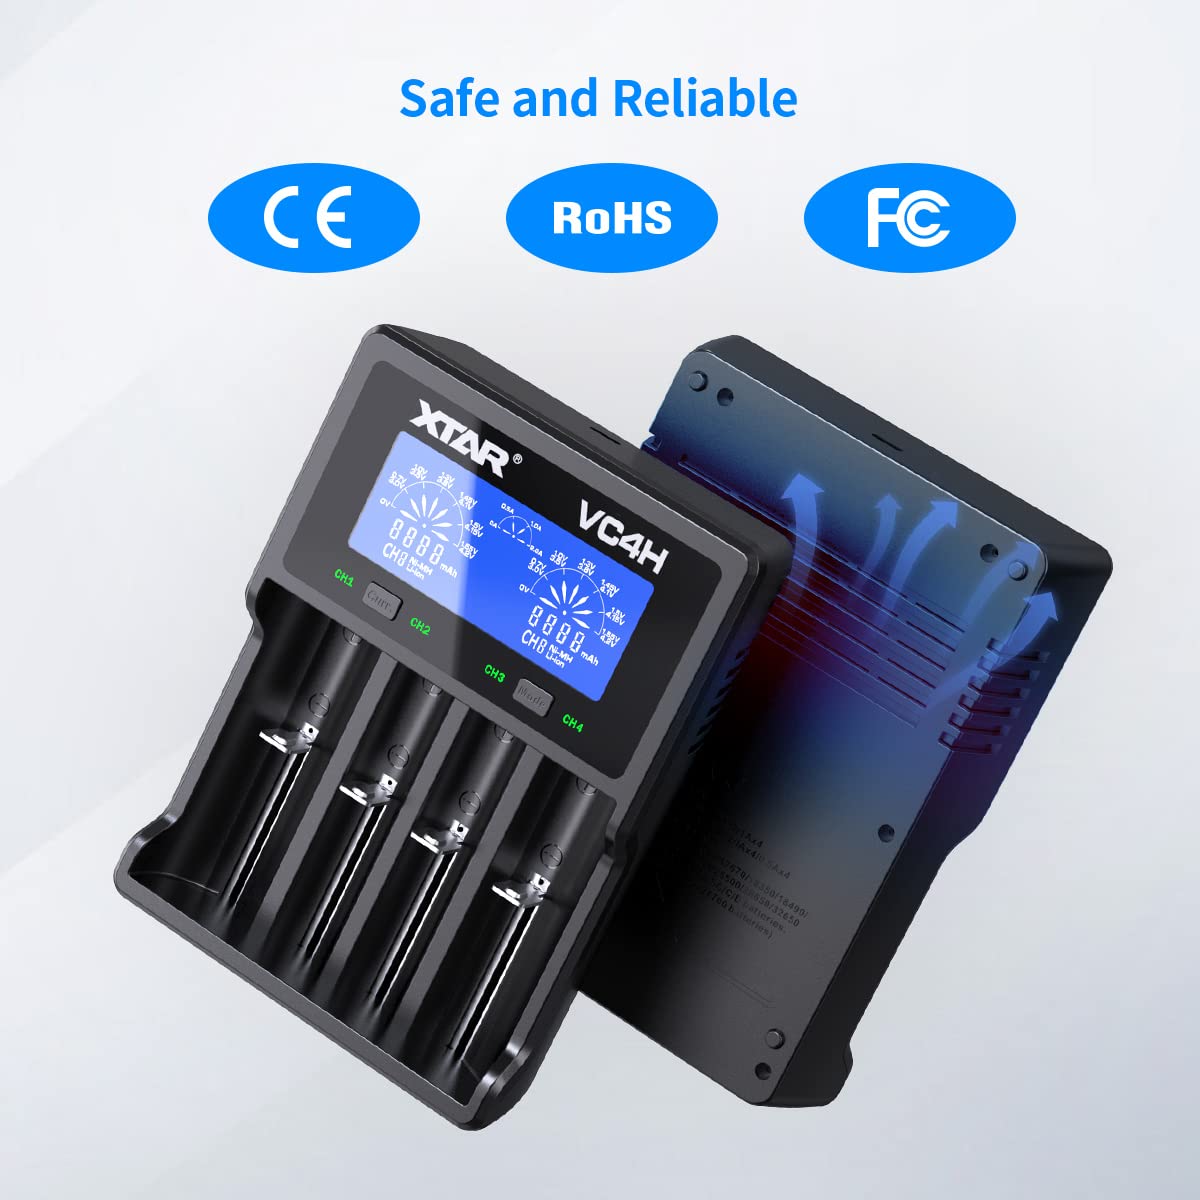 XTAR VC4H Charger 2022 NEW 18650 Battery Charger 4bays Universal 18650 Charger with LCD Display USB vap battery charger for liion 3.7v battery 16340 18350 20700 21700 26650 1.2V NI-MH NI-CD AAA AA